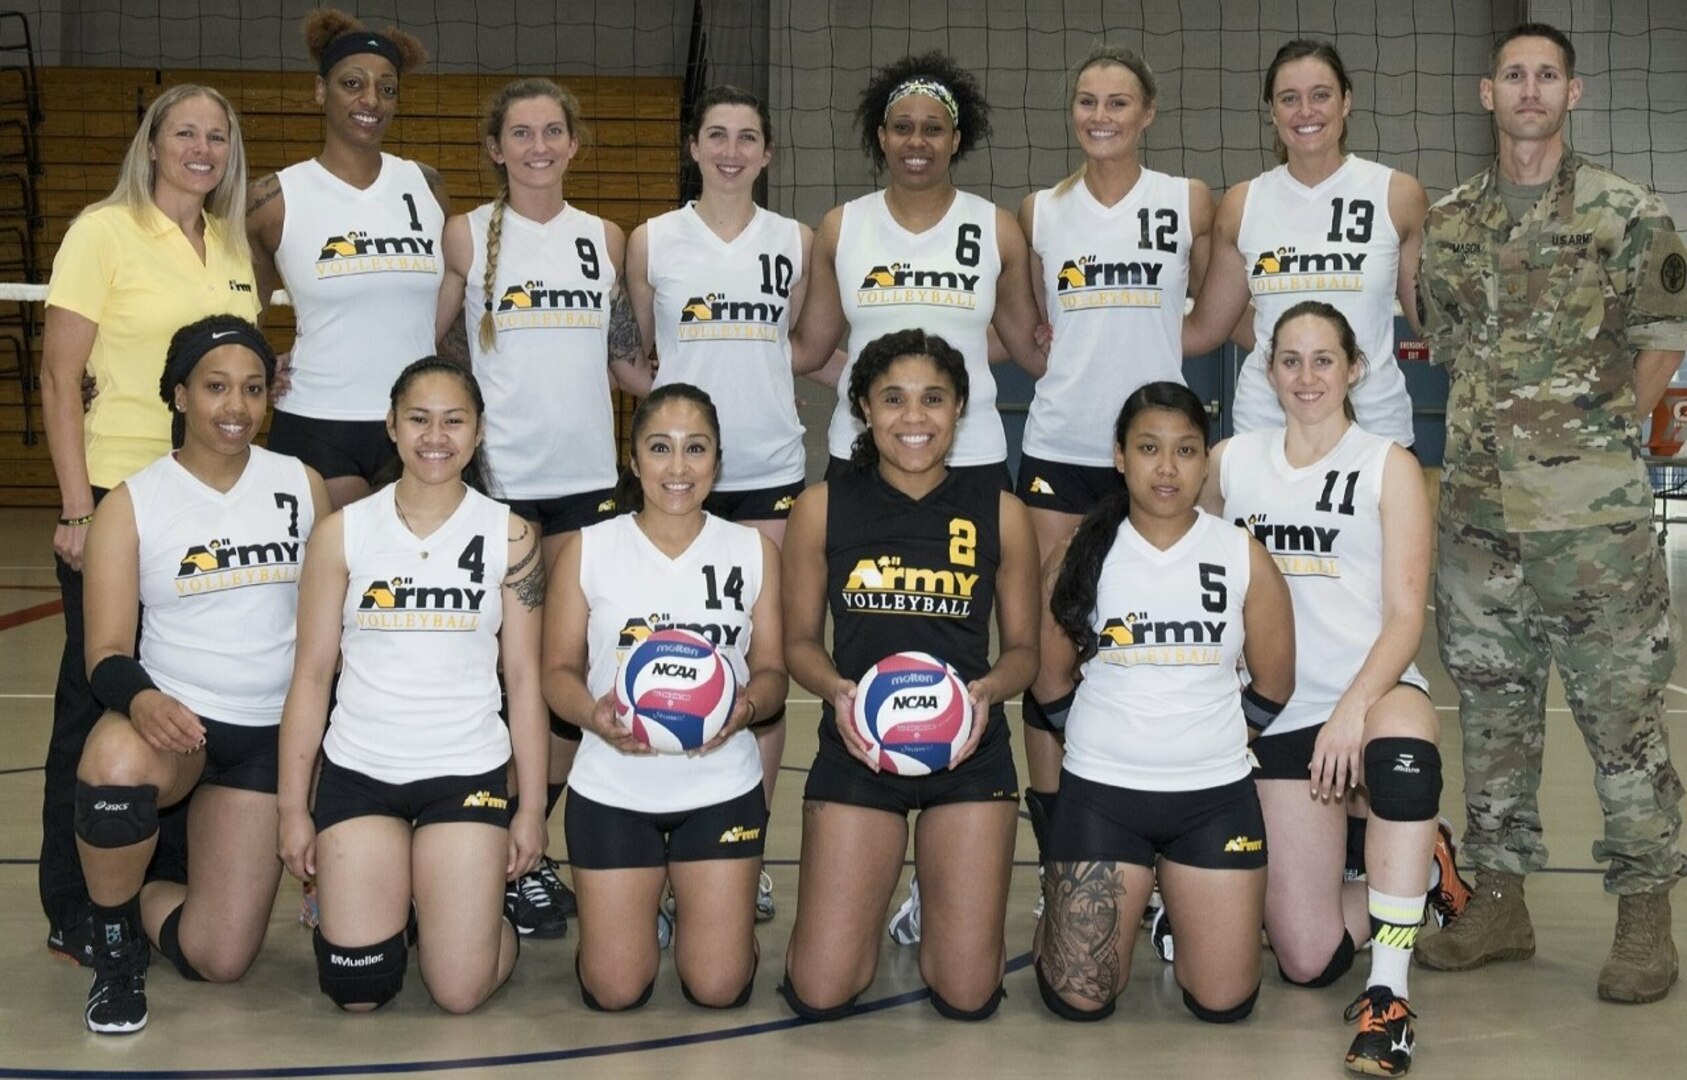 Spc. Rikki Inman, No. 9, poses on the volleyball court with members of the All Army Women’s Volleyball Team. Inman is an animal care specialist stationed on JBSA-Fort Sam Houston.